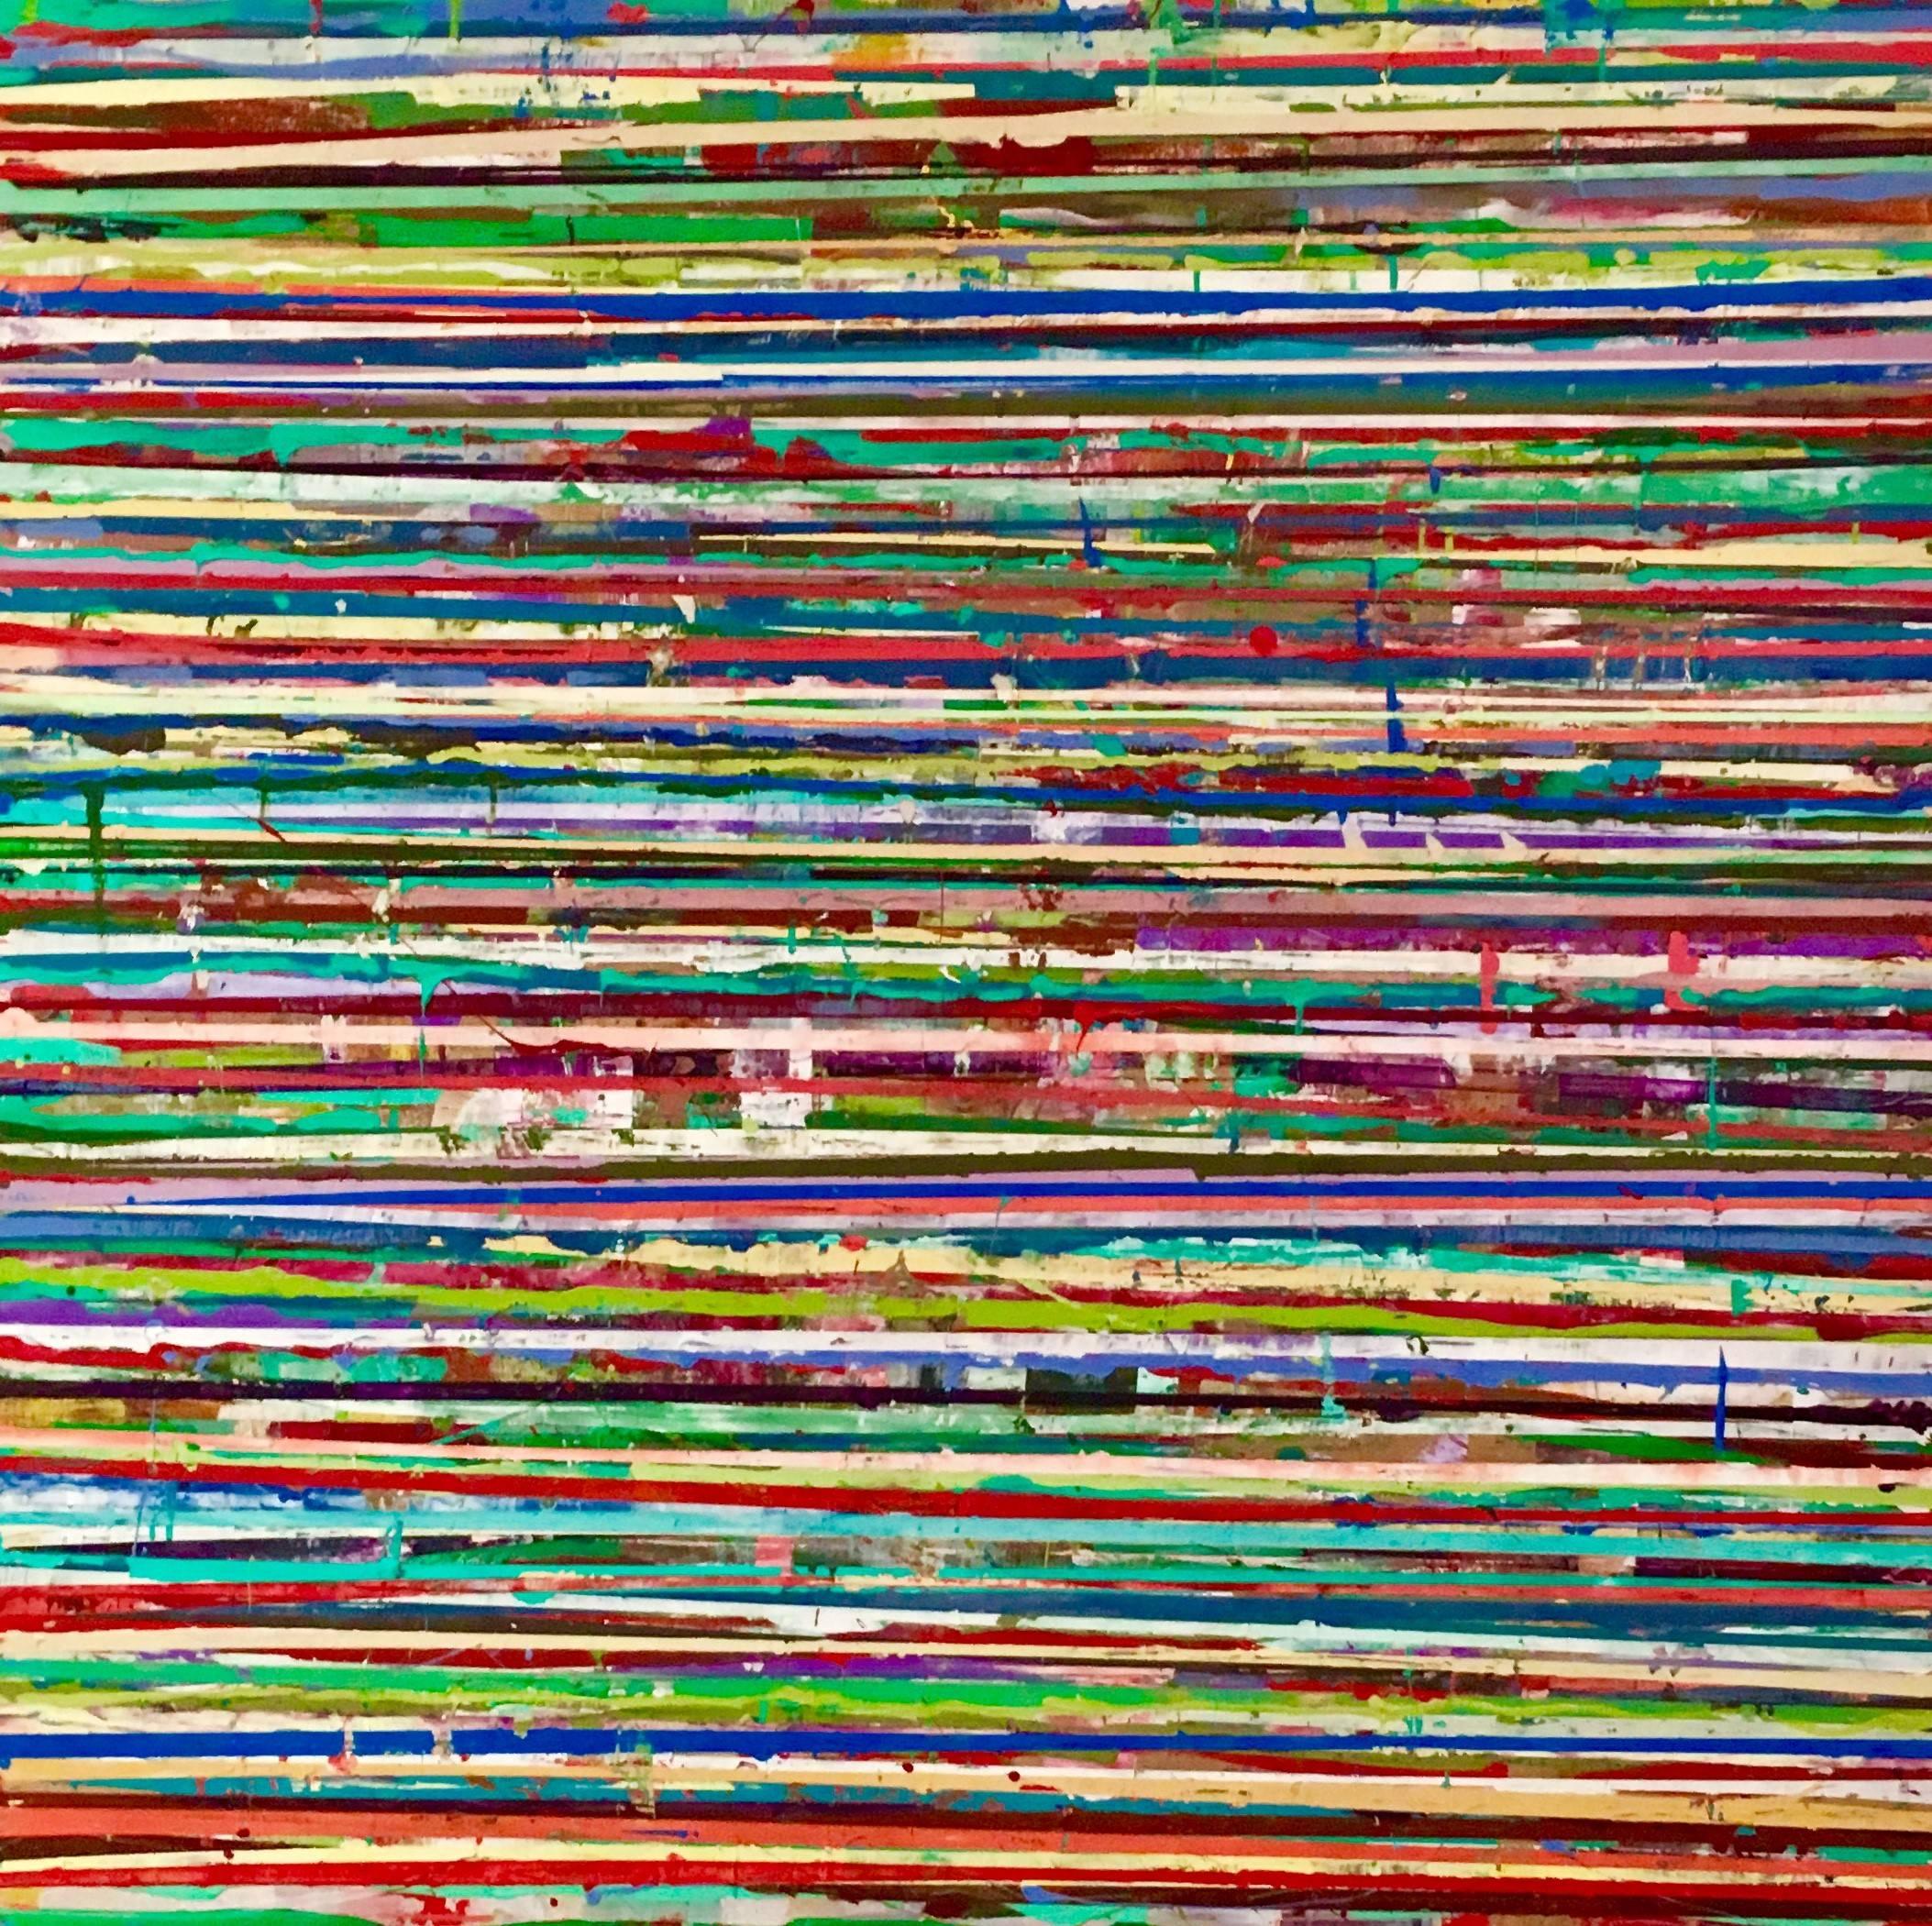 Vincent Pomilio Abstract Painting - 131 Horizon Lines (Striped Painting on Canvas, Bold Horizontal Bands of Color)